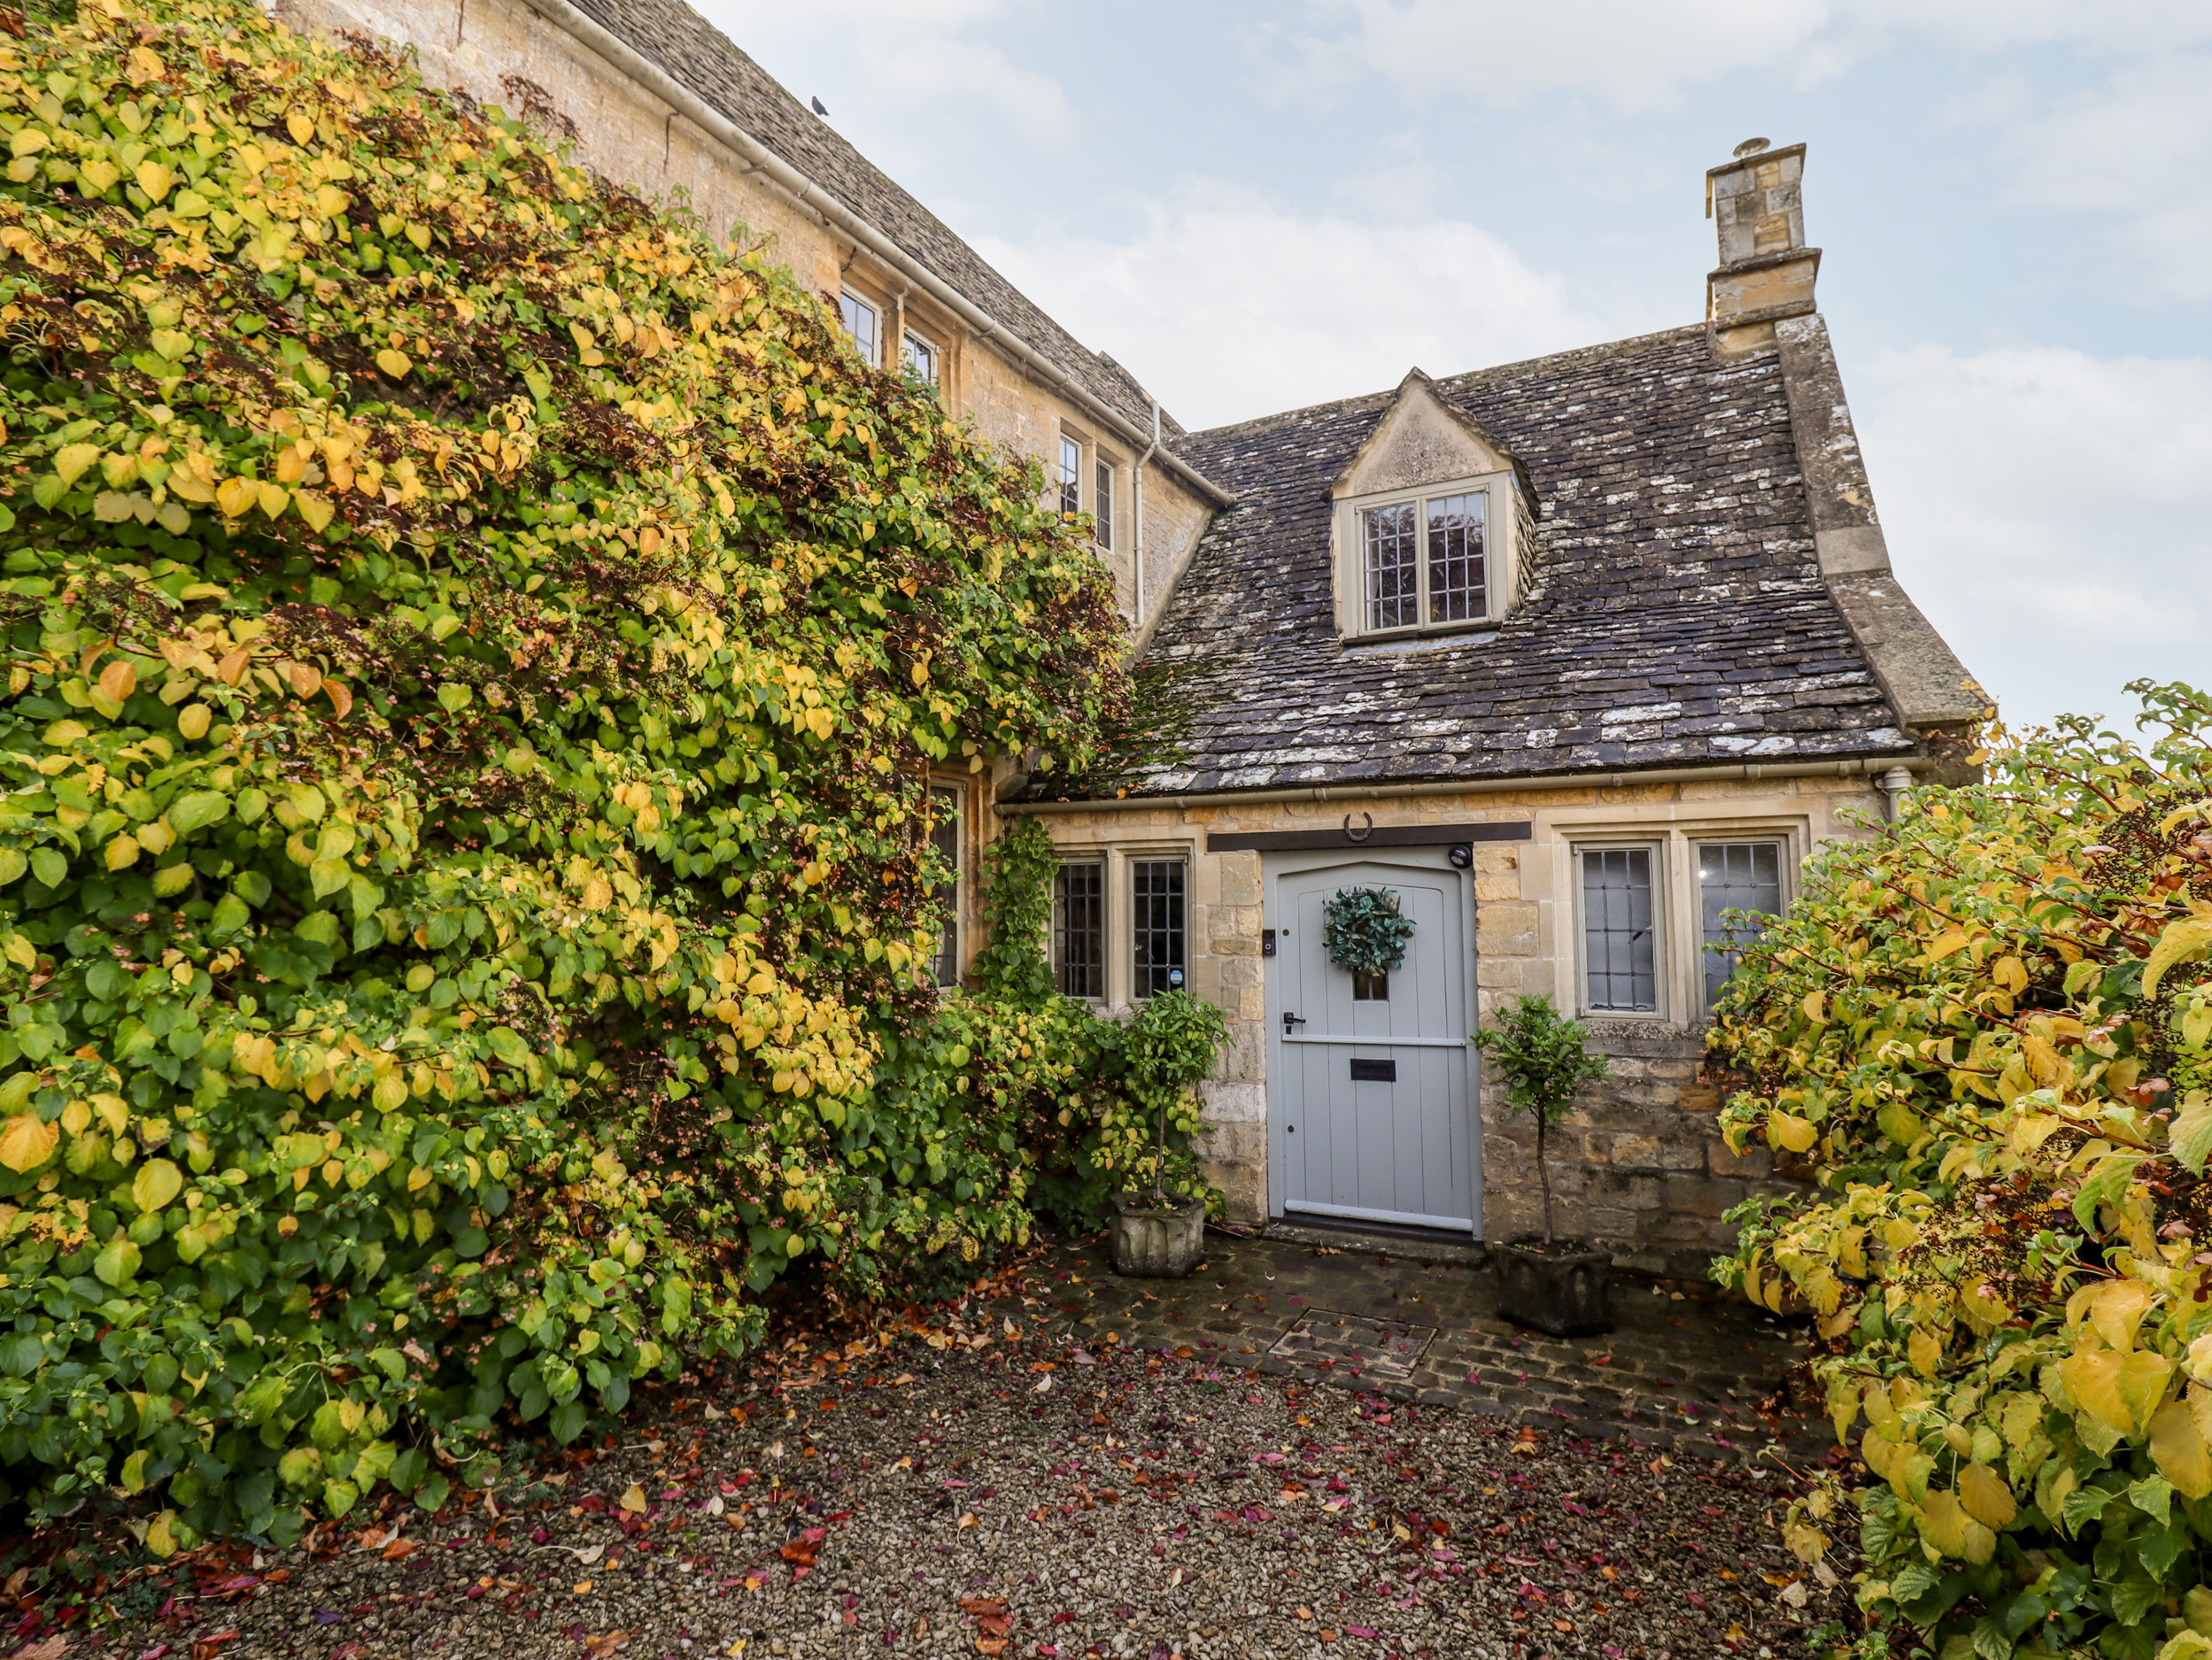 3 bedroom Cottage for rent in Bourton on the Water